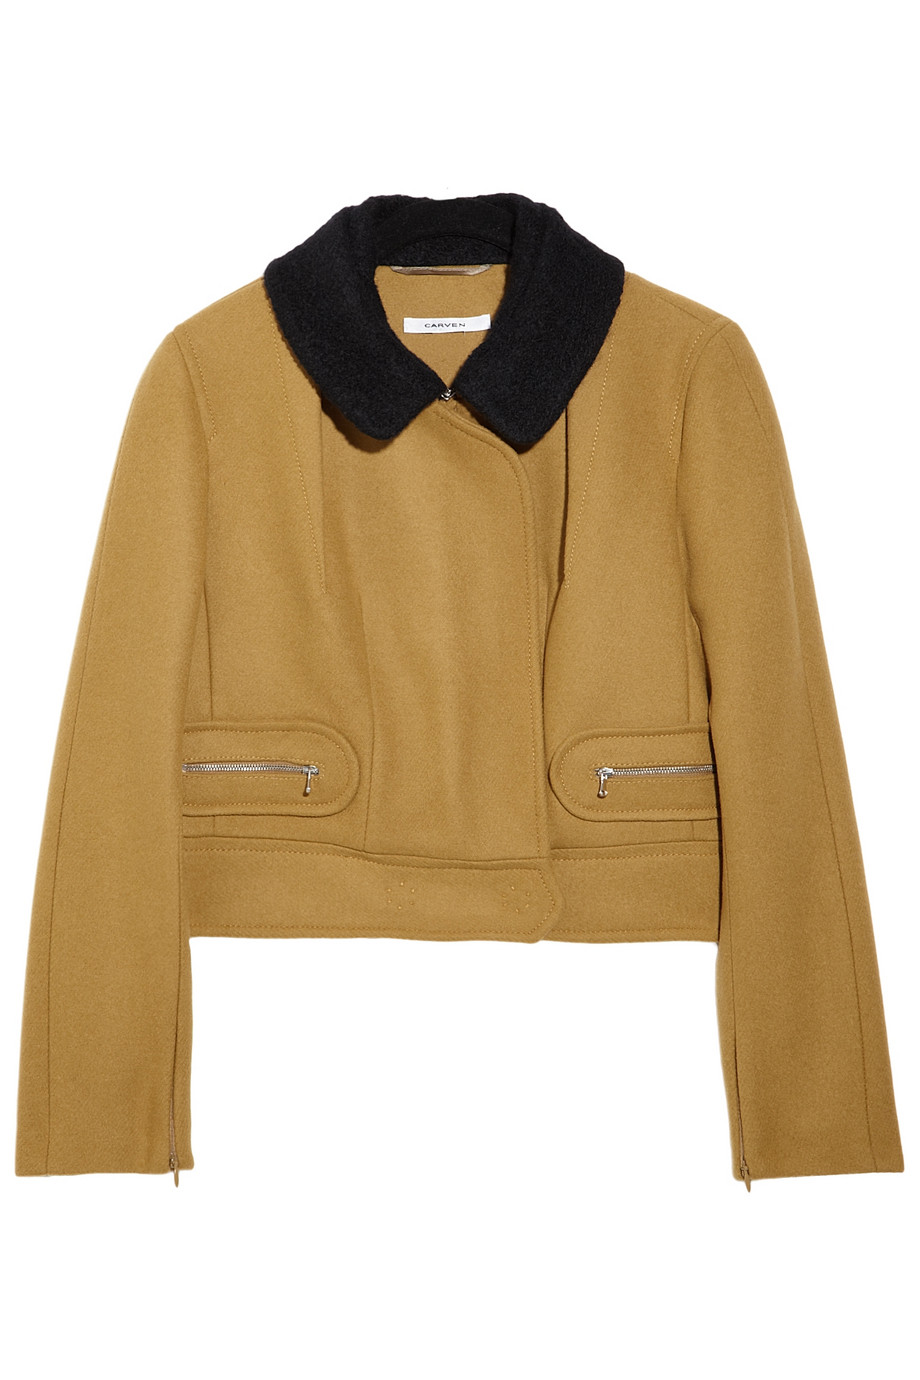 Lyst - Carven Wool and Cashmere Blend Jacket in Natural